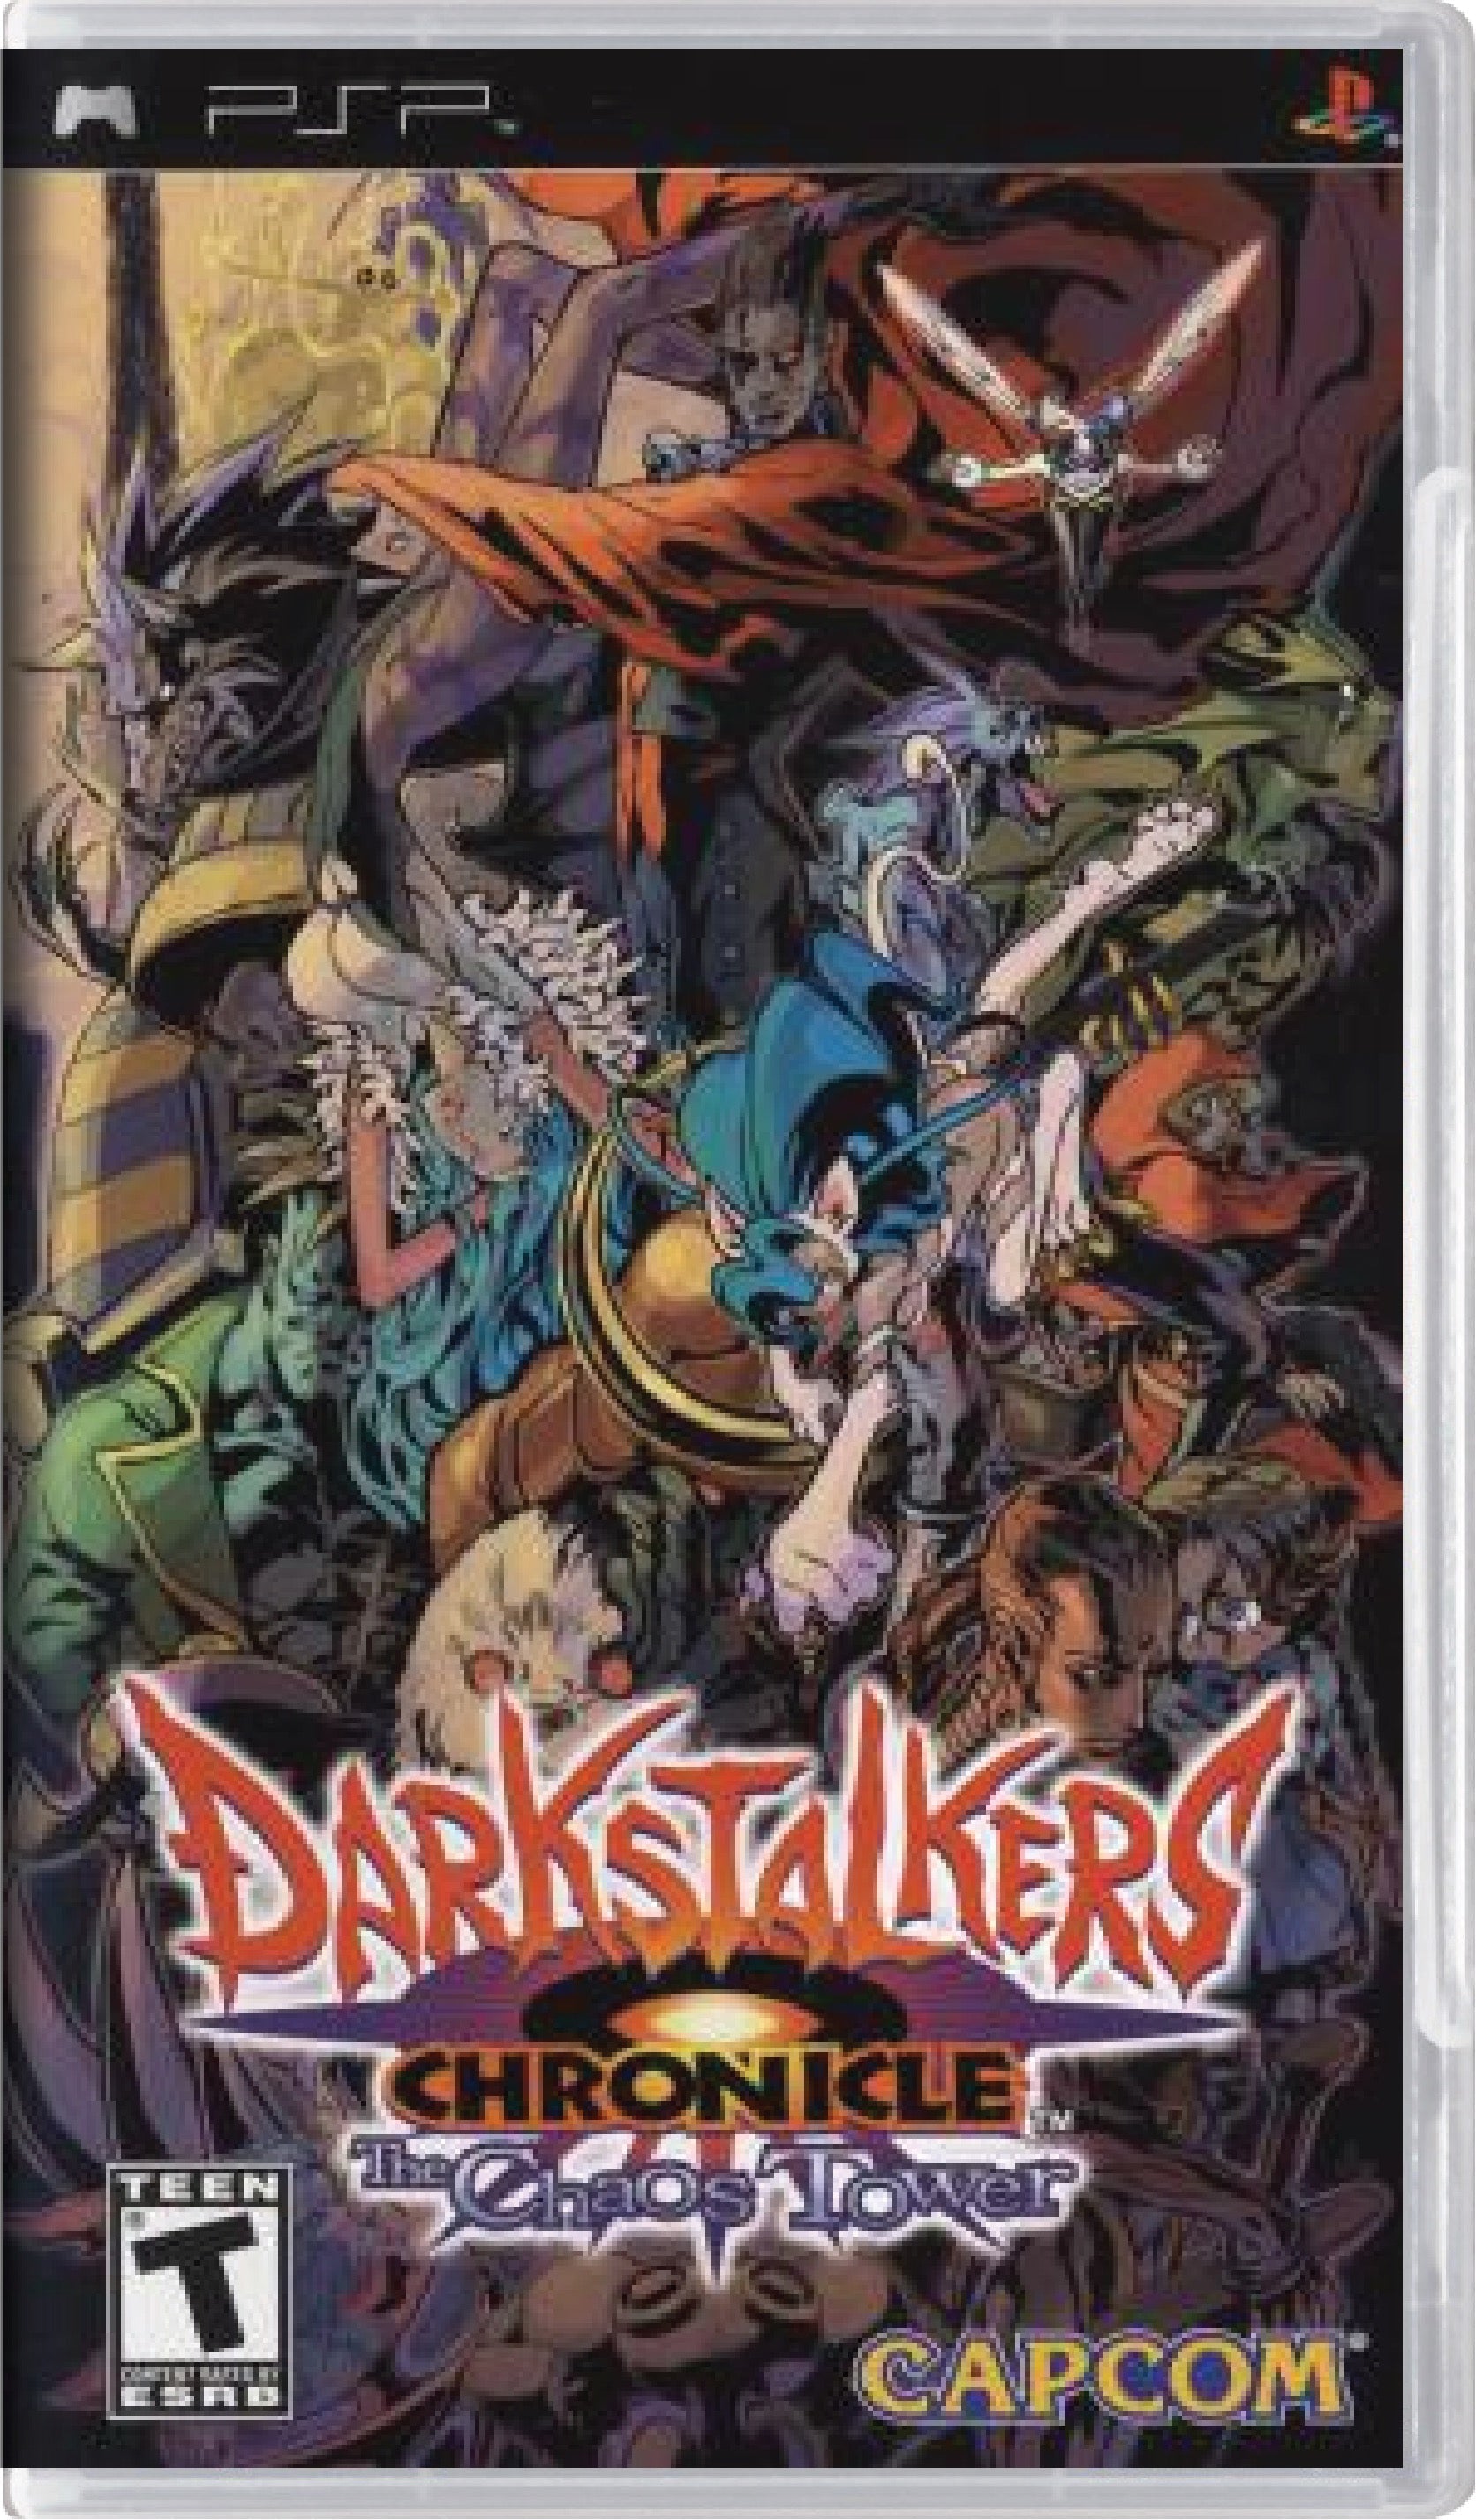 Darkstalkers Chronicle The Chaos Tower Cover Art